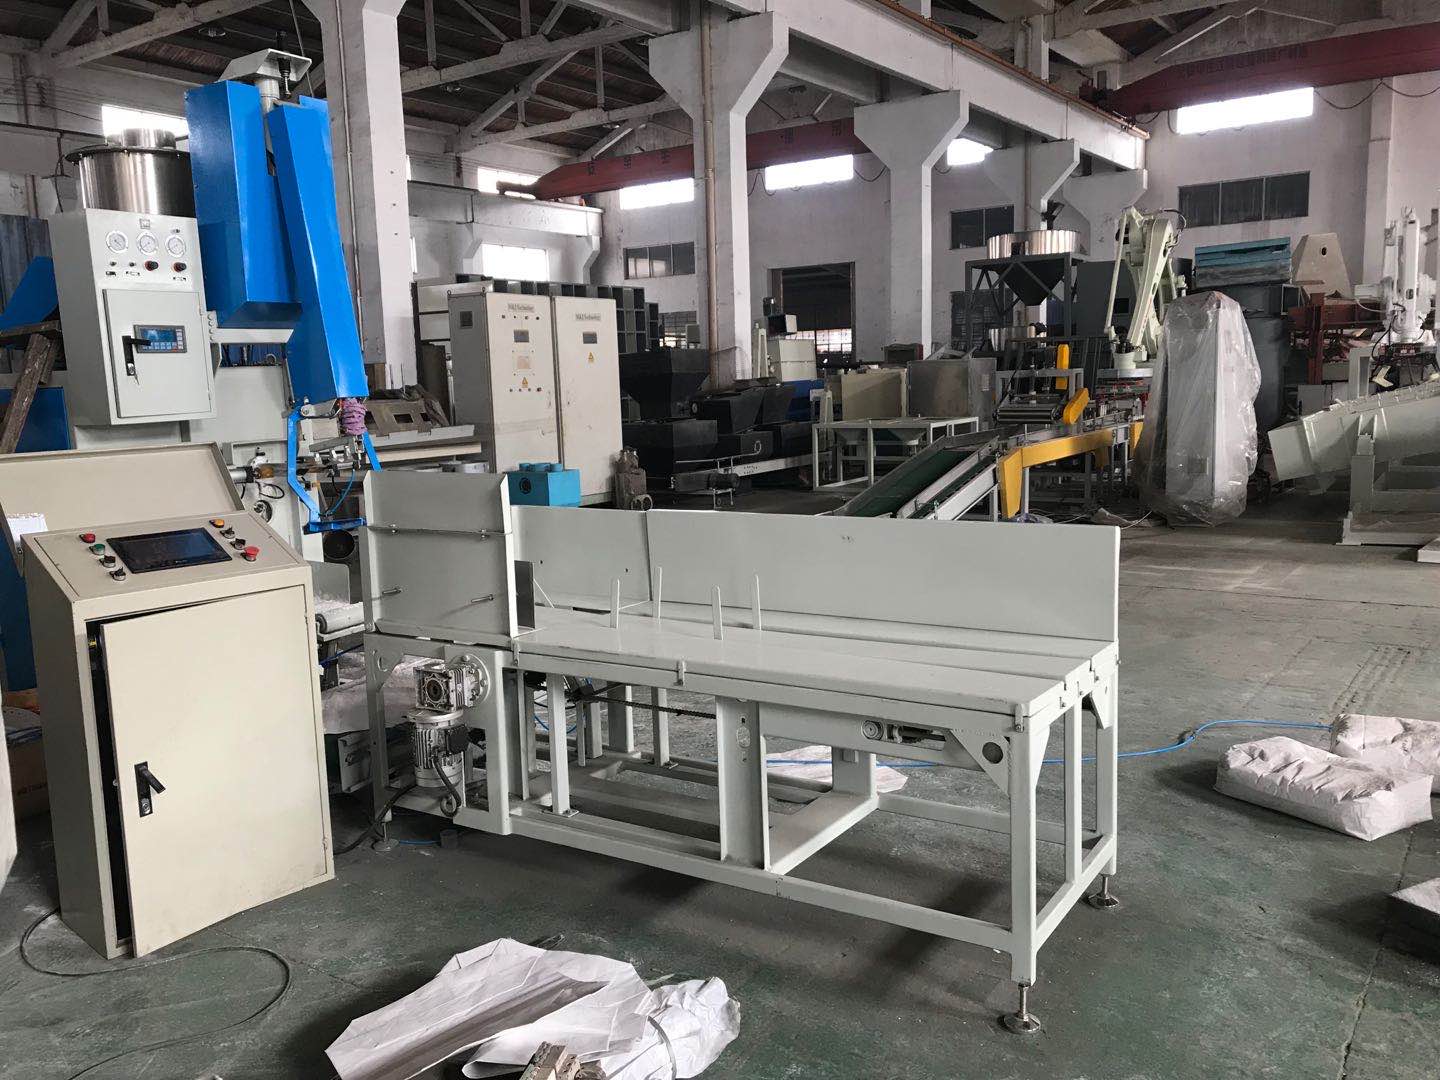 packing machine Talc Powder bagging machine fully Automatic Packing Palletizing Line, Fully Automatic Packing Line, Fully Automatic Bagging Line, Fully Automatic filling and packaging line, automated 